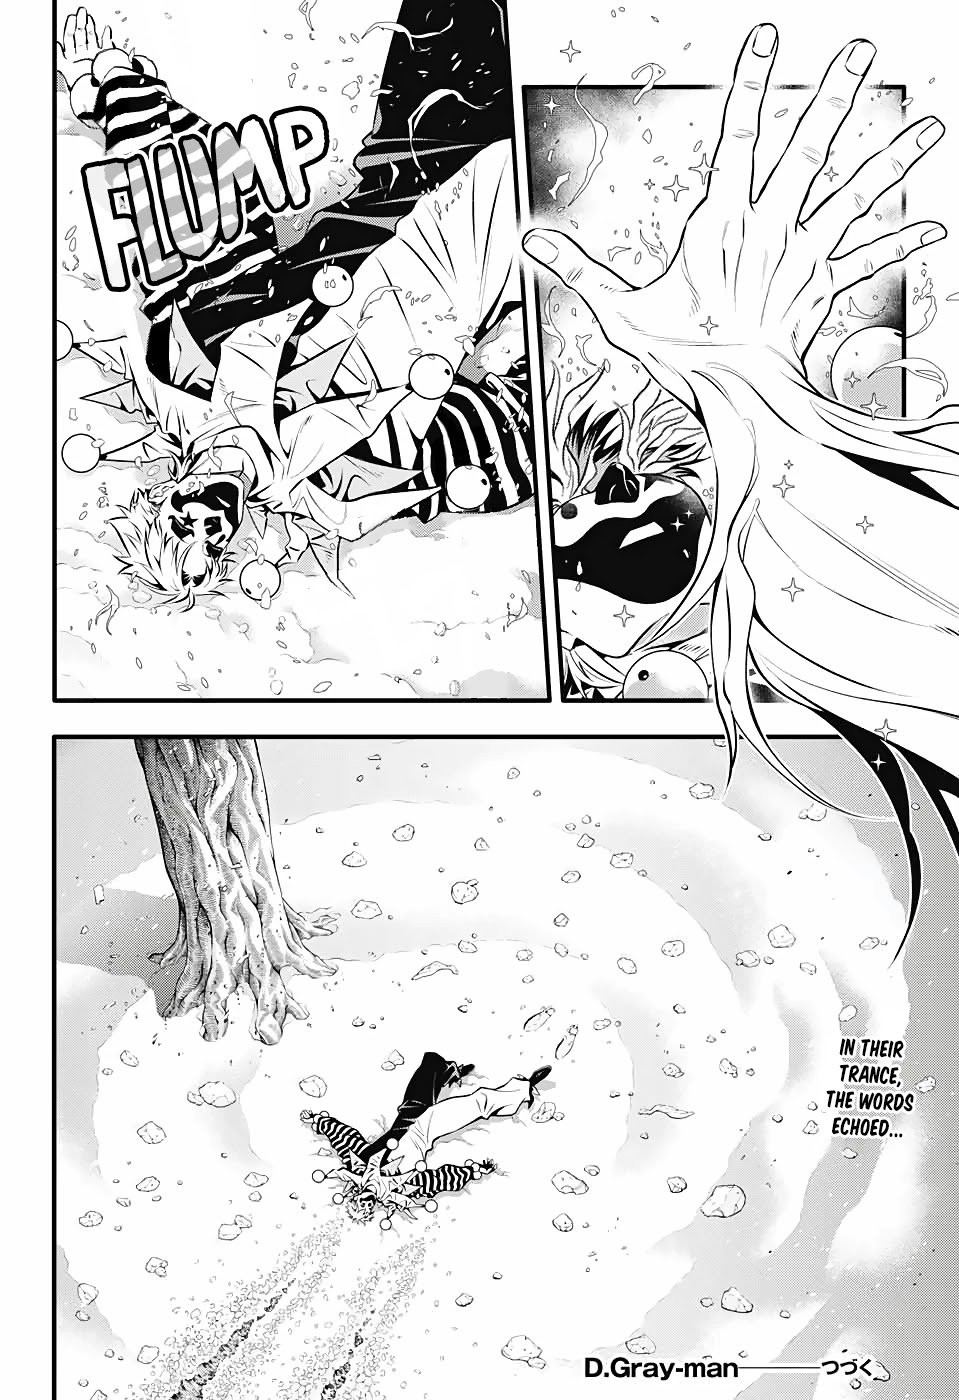 D.Gray-man chapter 239 page 18